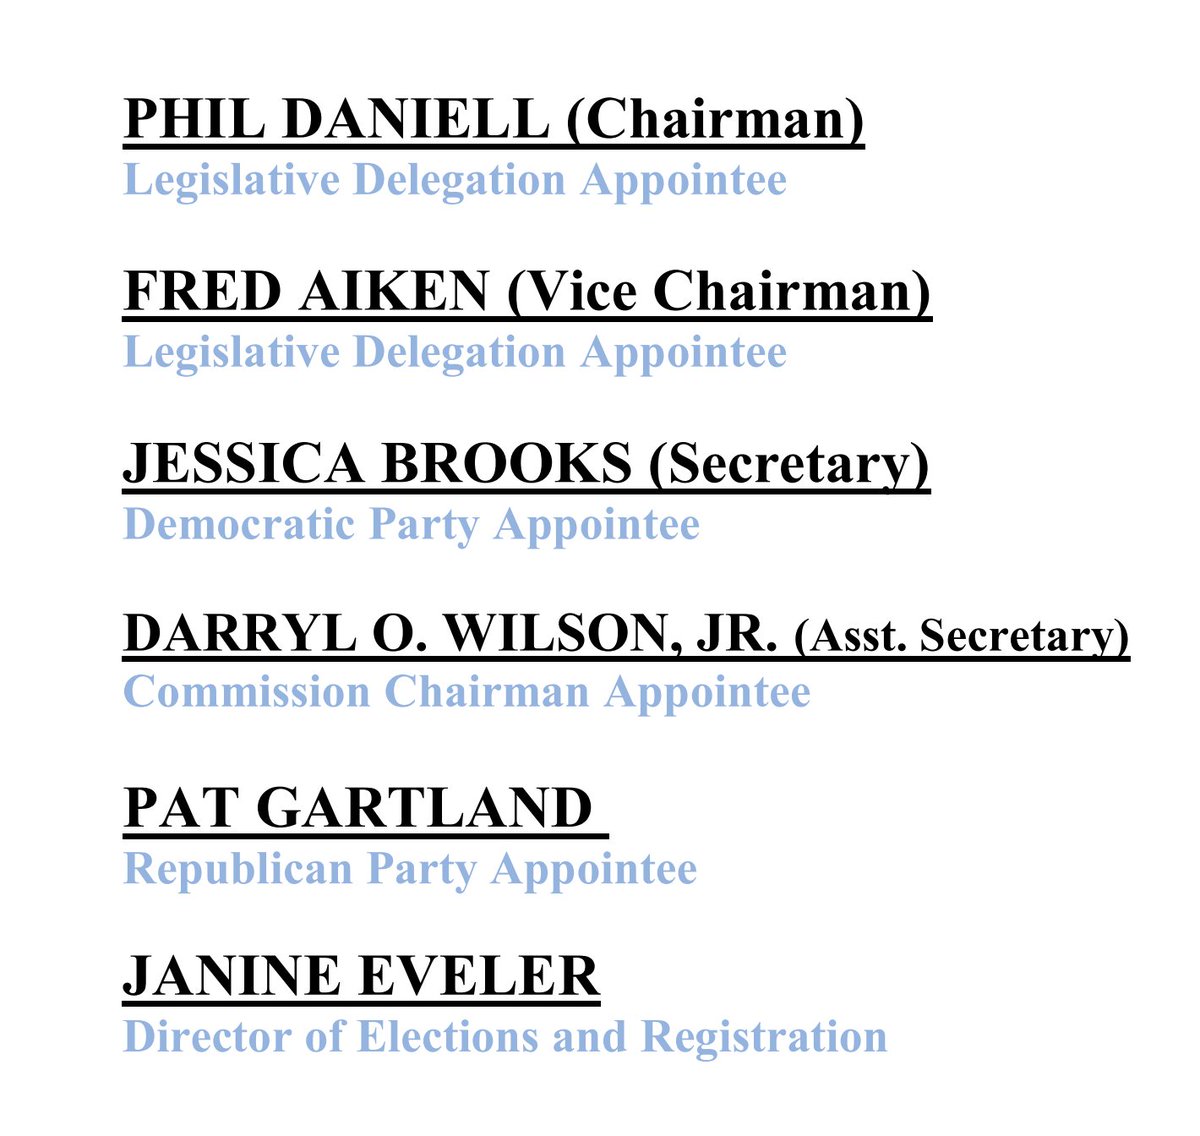 The Cobb Board of Elections has four Republicans & one Democrat. While each party gets one seat, the other members are political appointments, including one member who was appointed by the soon-to-be-former county commission chair who was just defeated in the general election.